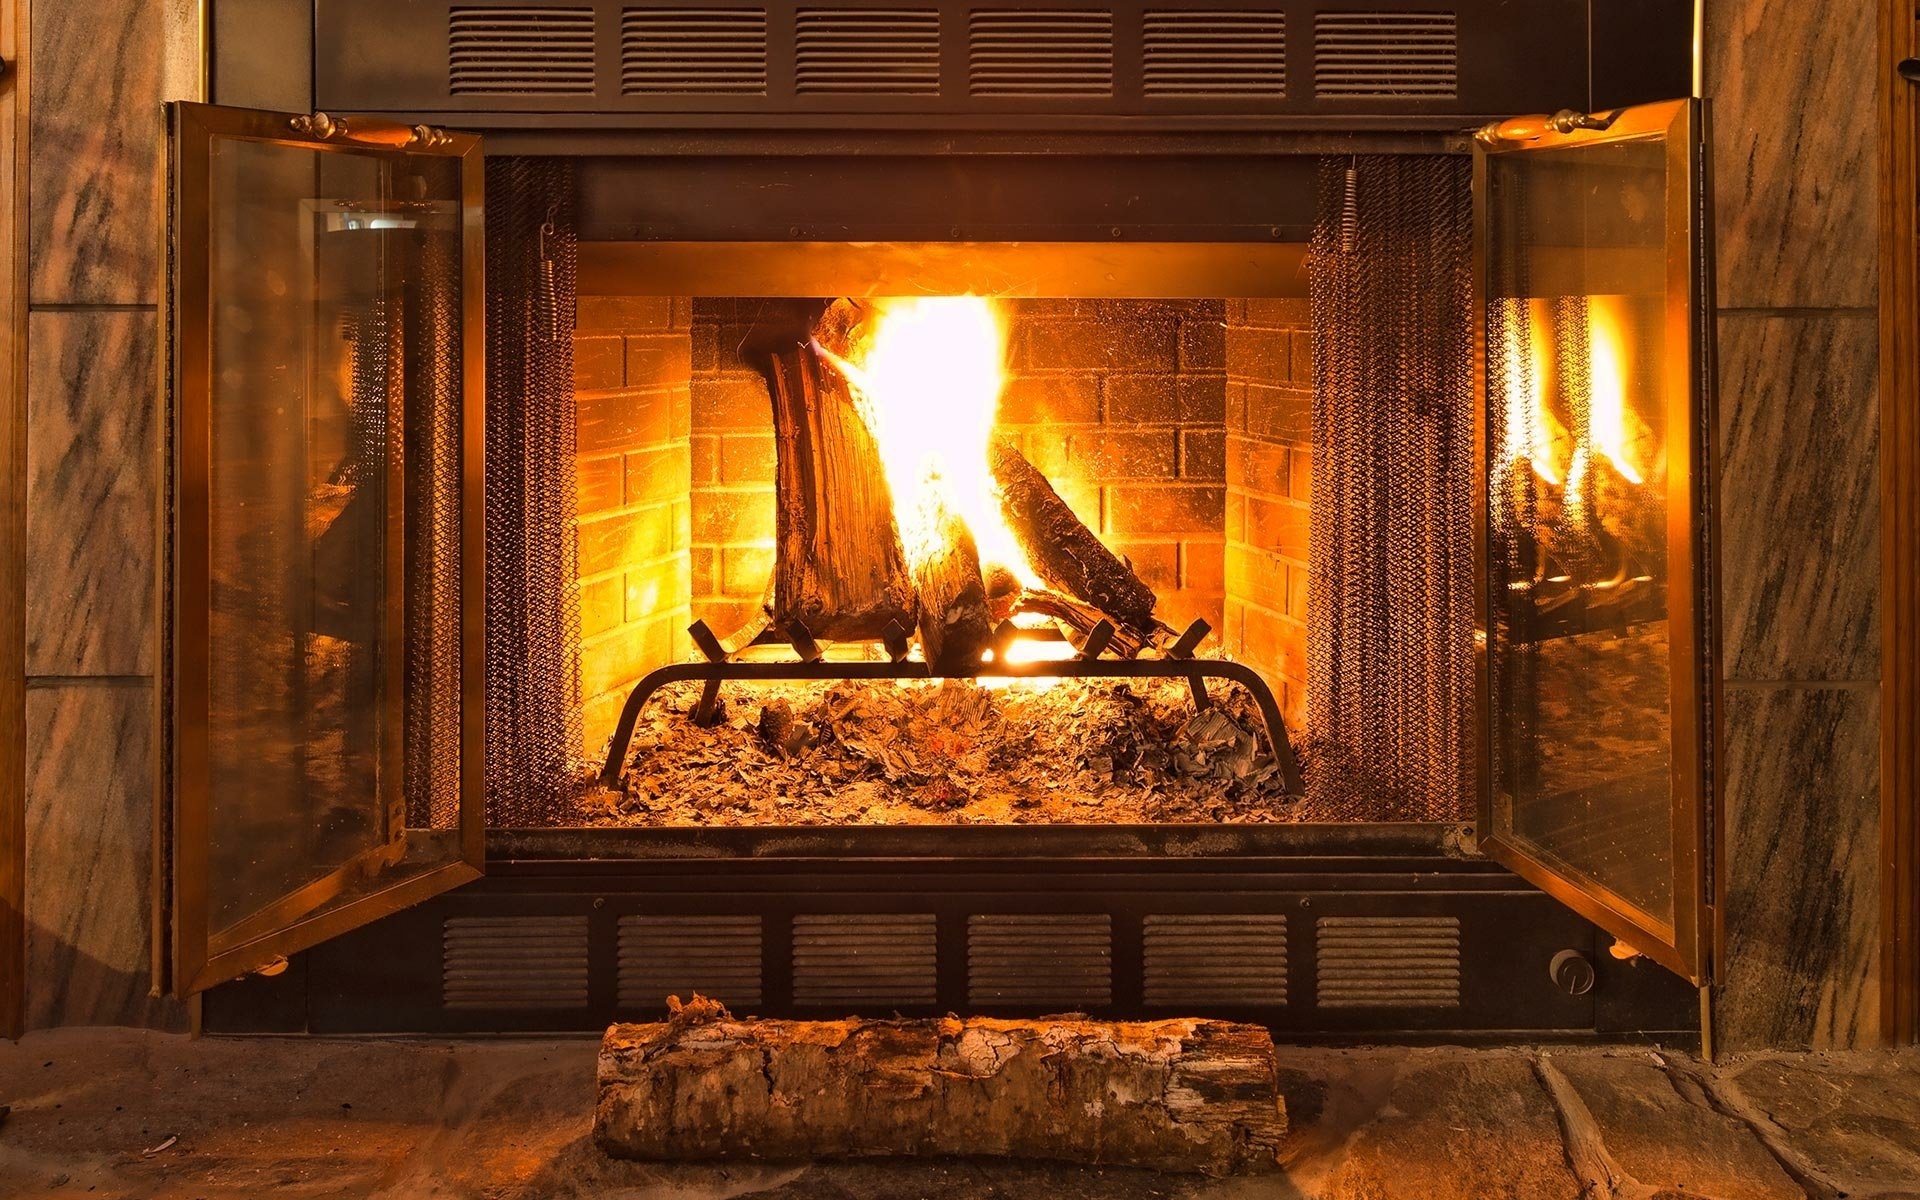 Fireplace: A structure designed to safely contain a fire, Lighting, Burning logs. 1920x1200 HD Wallpaper.